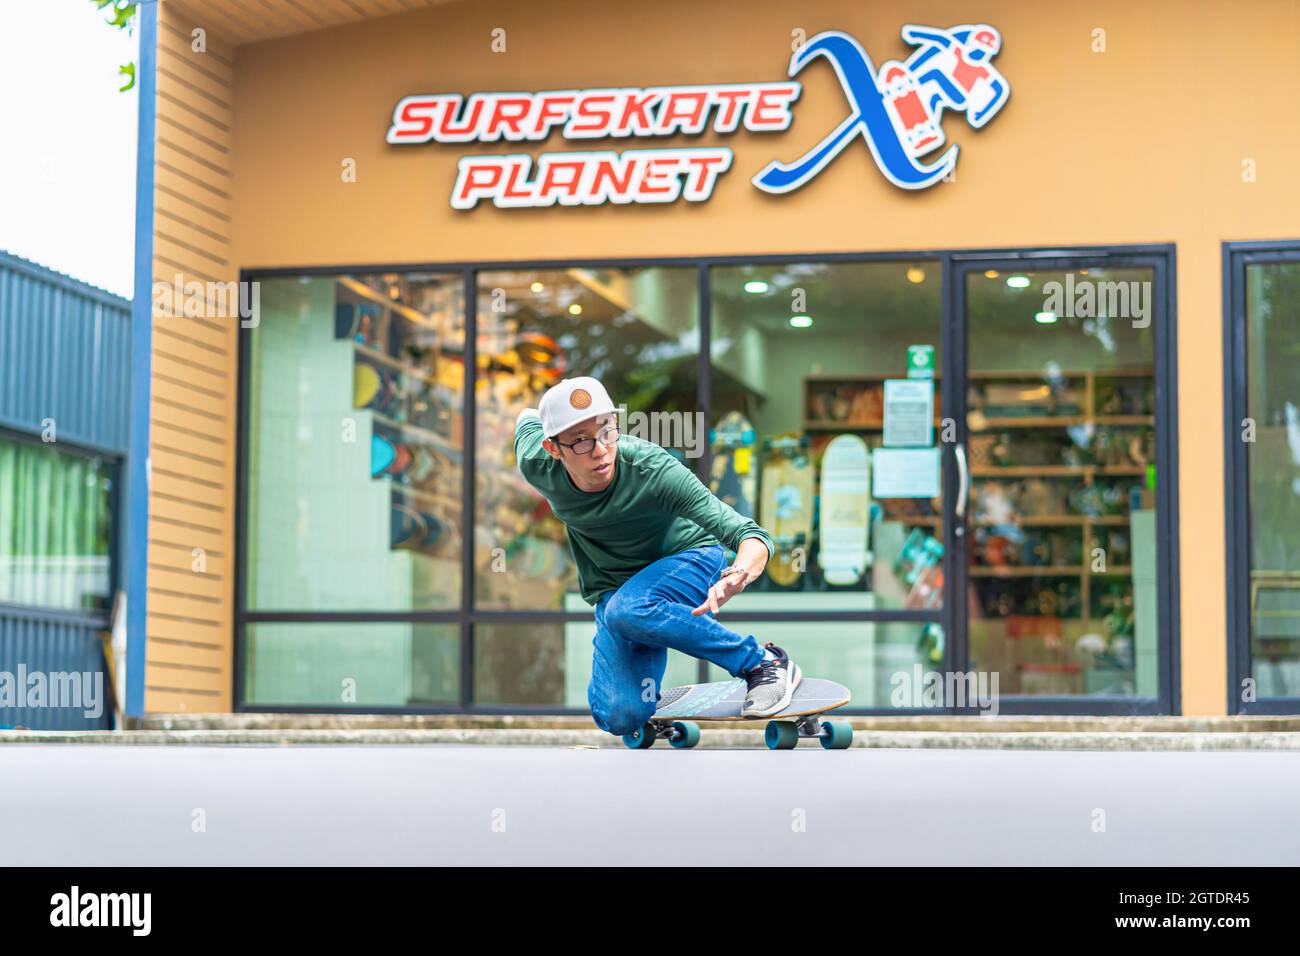 Asian Cheerful man playing surfskate or skateboard in front turn action over the surfskate planet x store sop at bangkok, Thailand  extream sport, hea Stock Photo